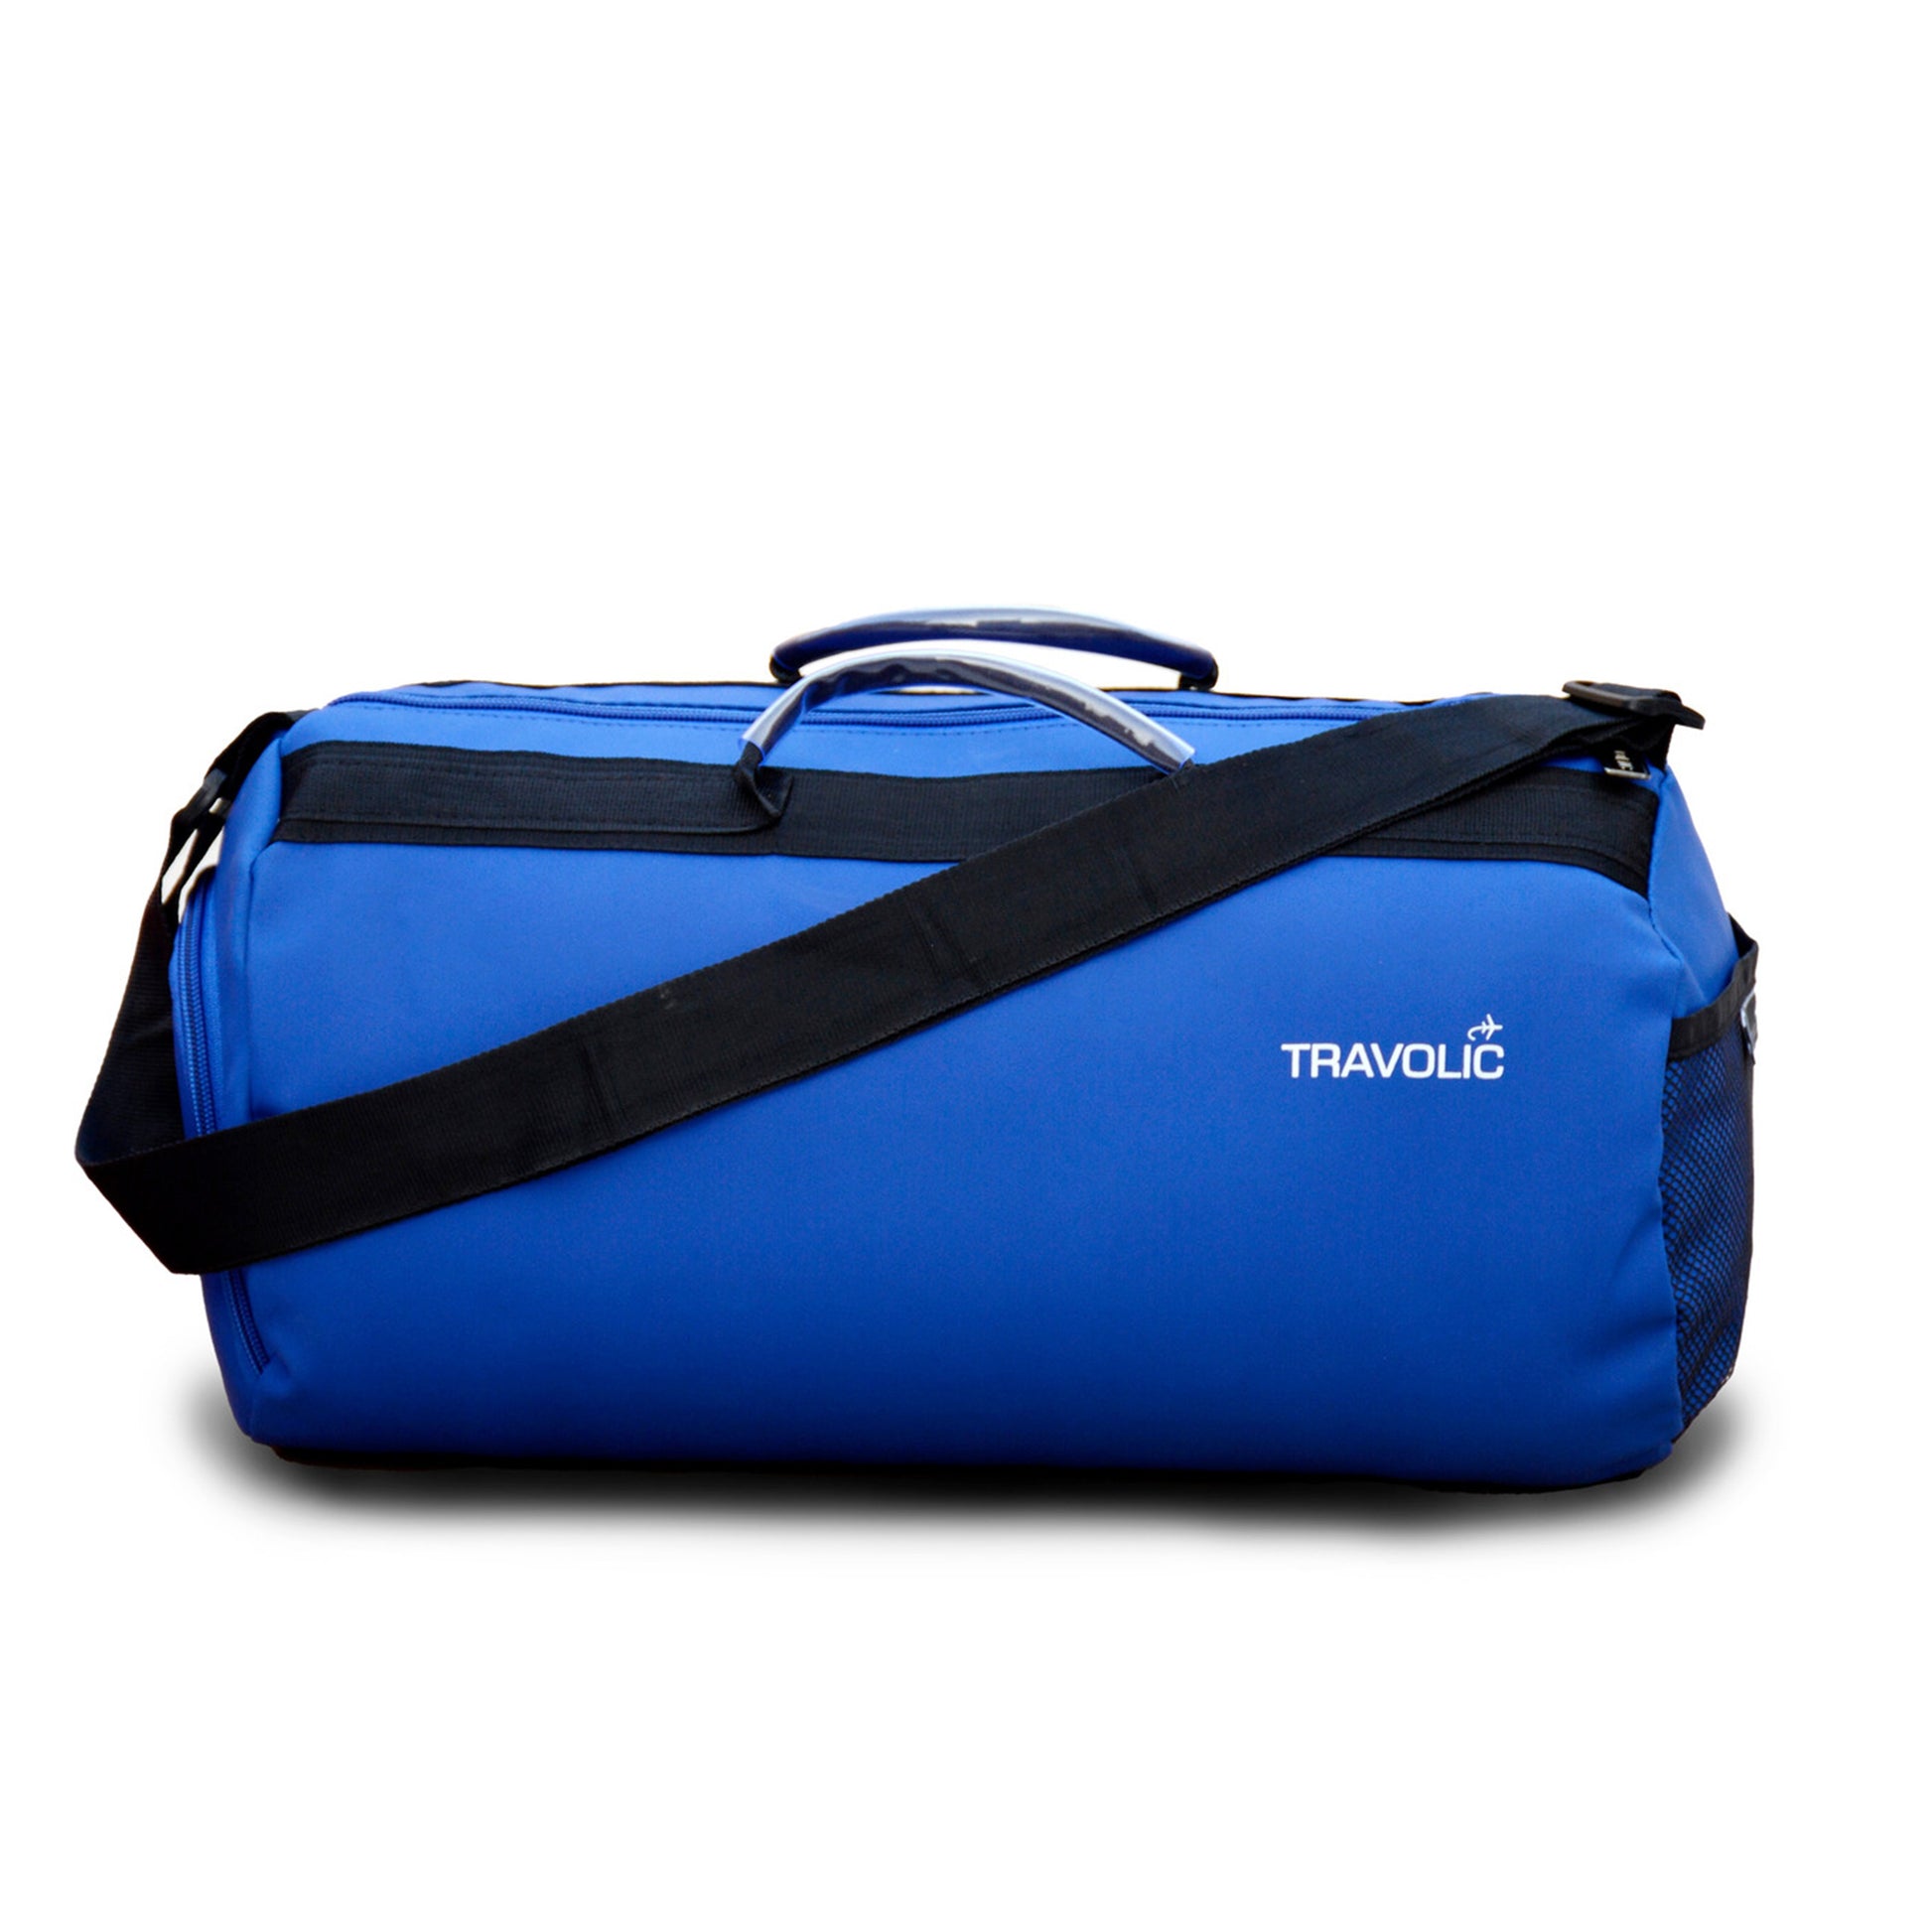 Waterproof Synthetic Blue Gym Bag Travel Bag Yoga Bag at Rs 375 in